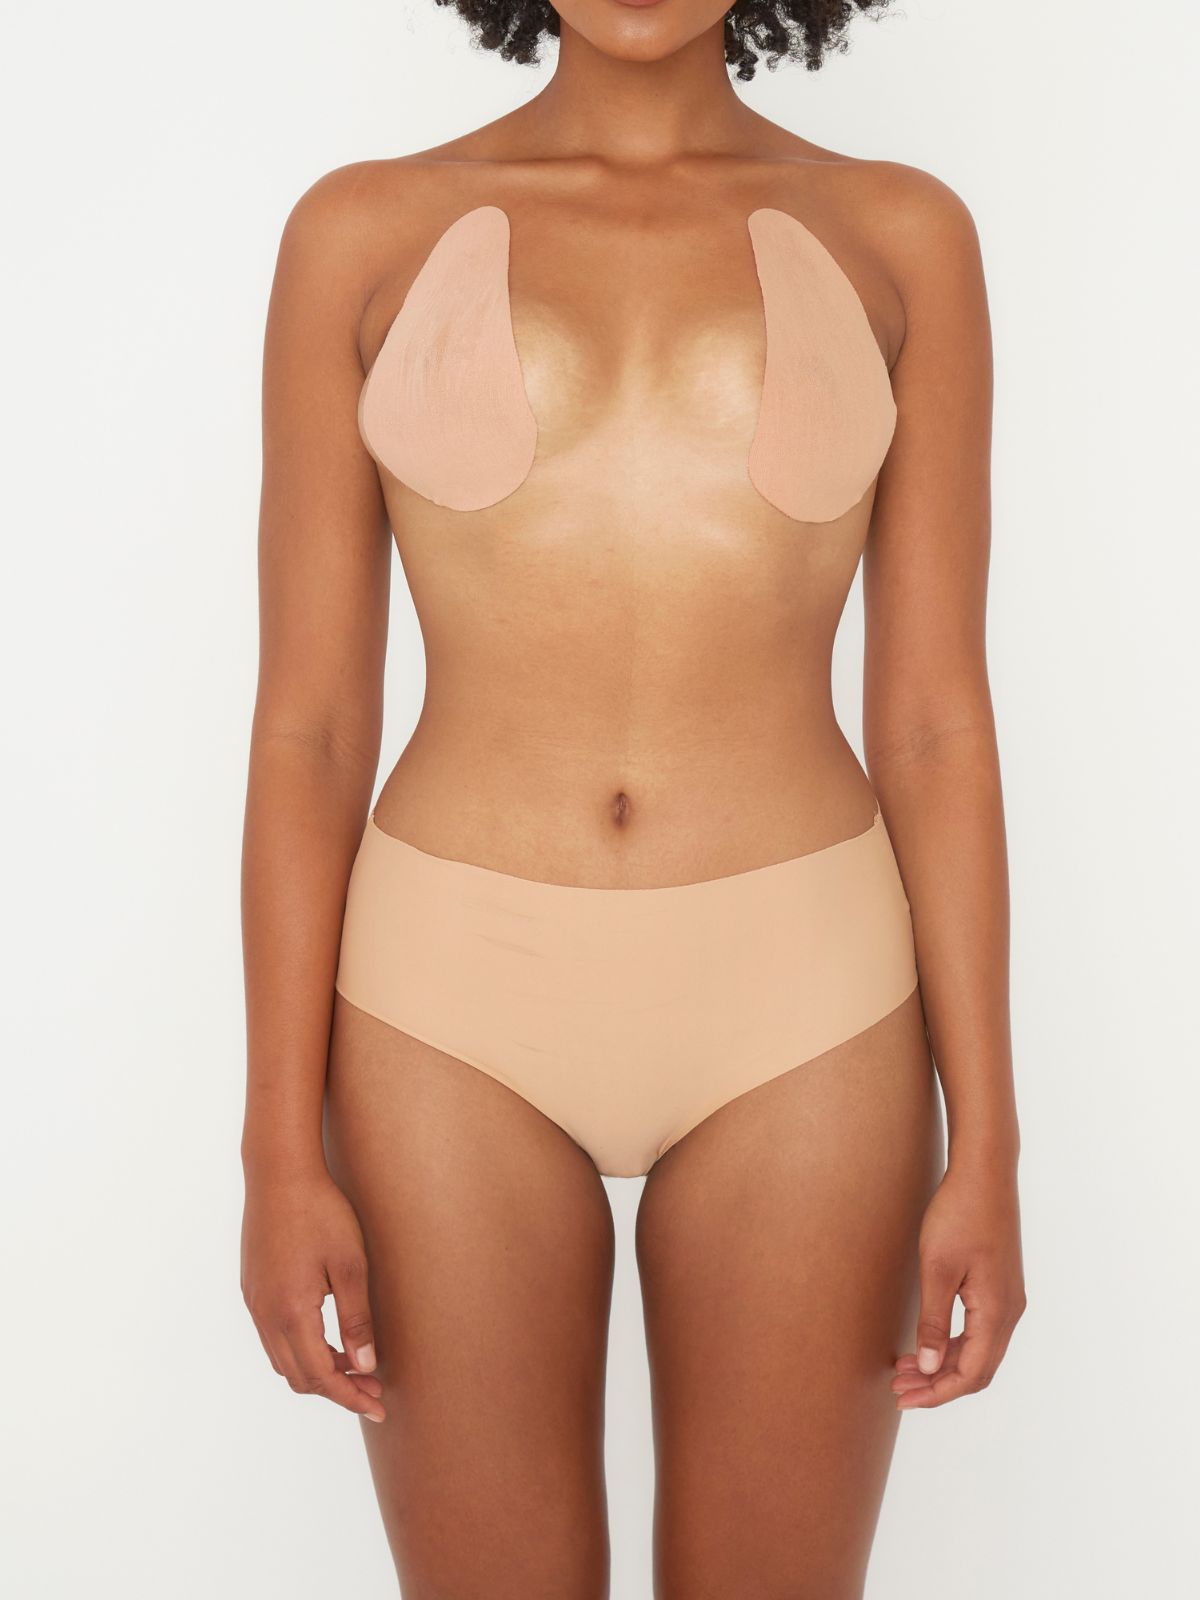 Original Lift and Shape Tape by Perky Pear / Beige